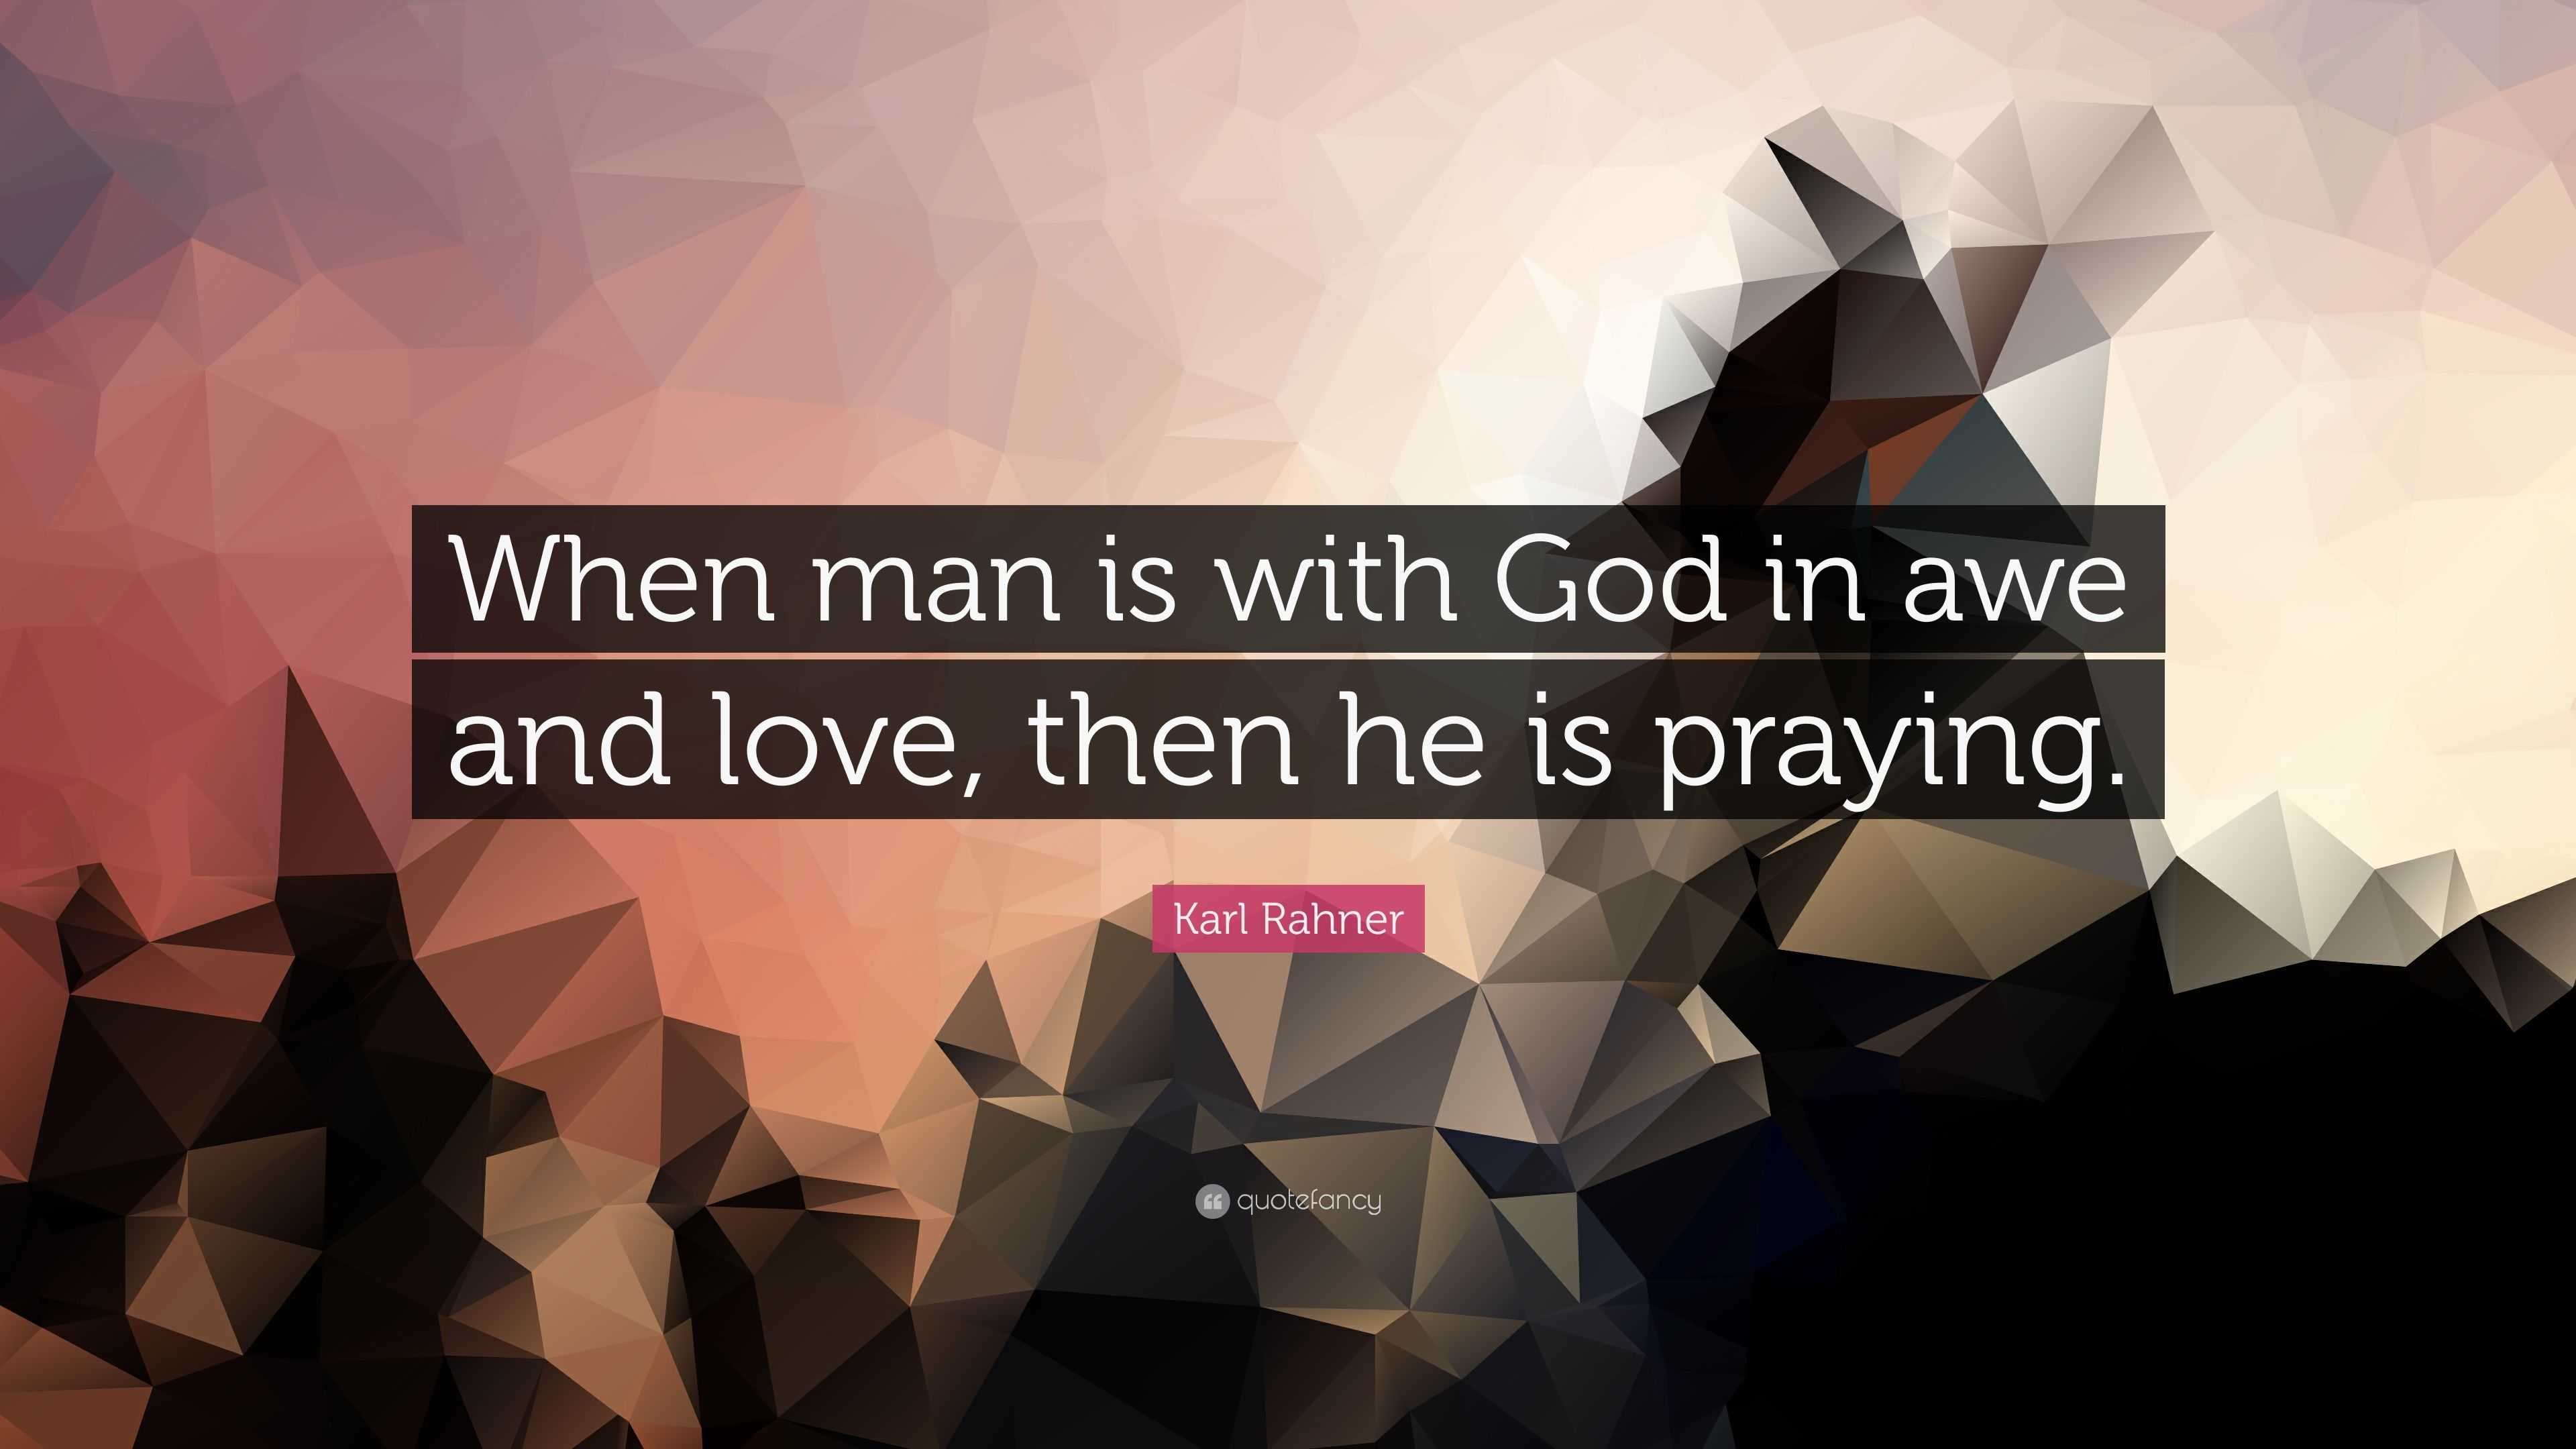 Karl Rahner Quote When Man Is With God In Awe And Love Then He Is Praying